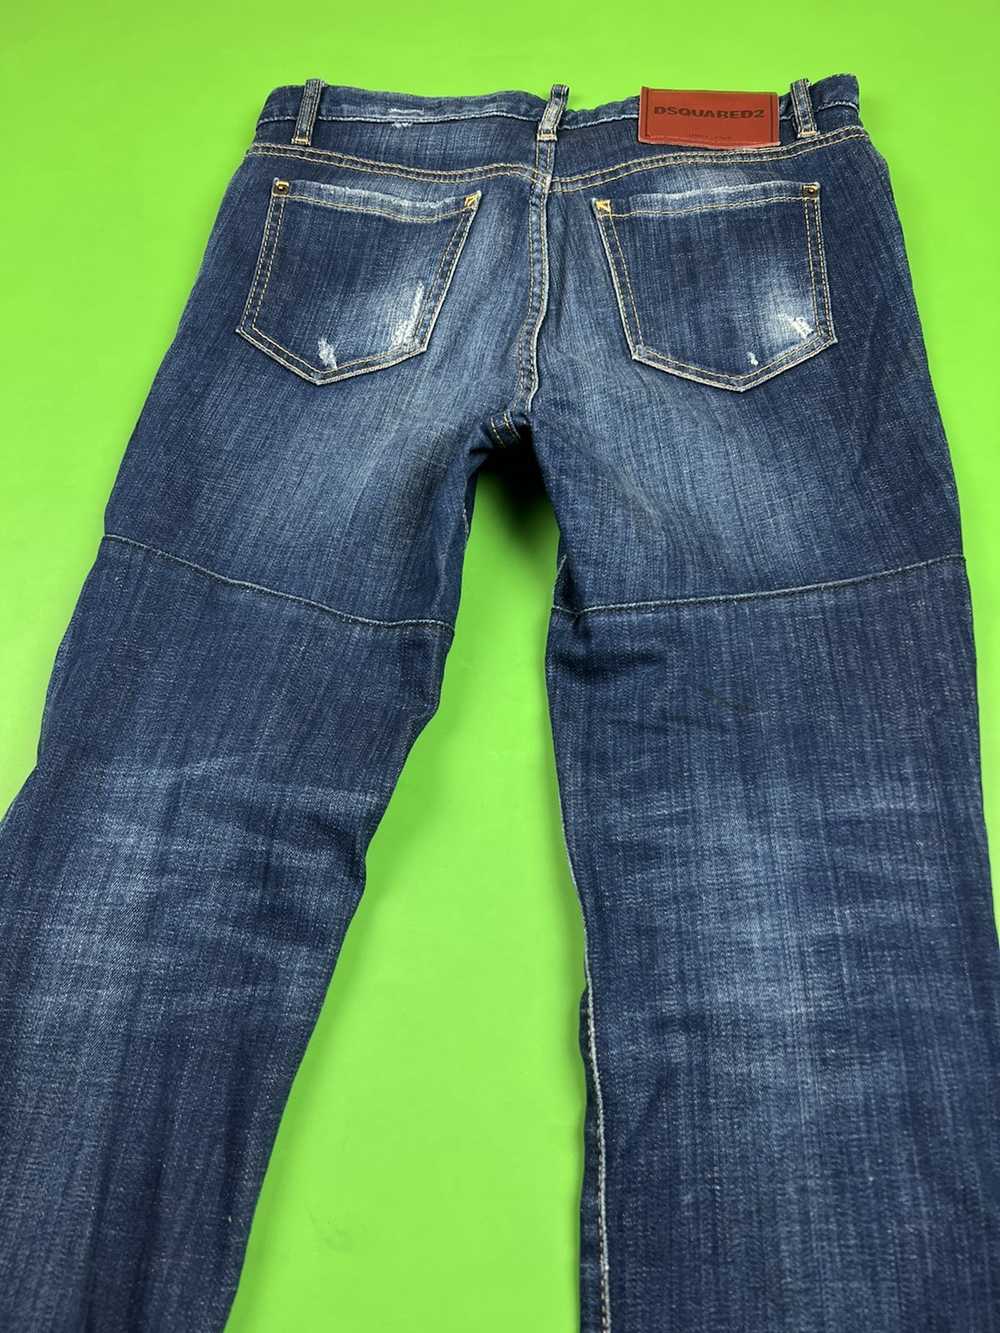 Dsquared2 Dsquared2 Blue Washed / Distressed Slim… - image 10